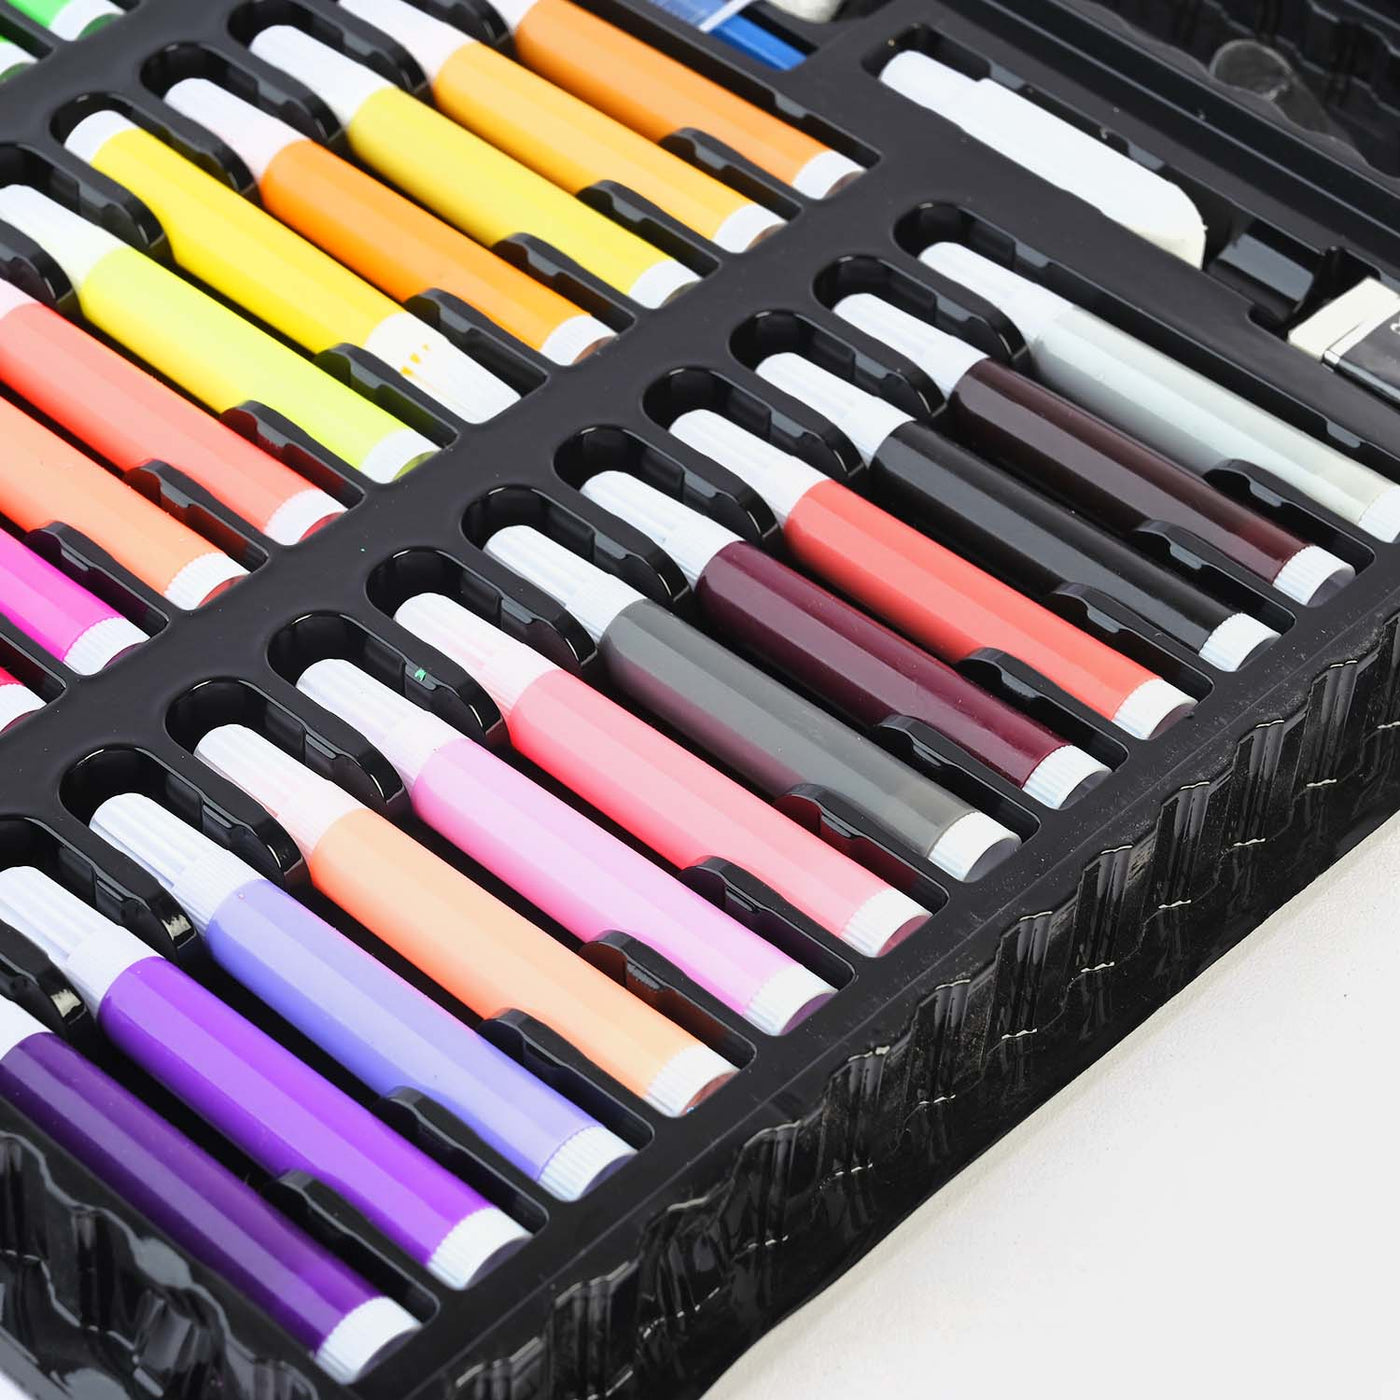 Color Pens Colorful Pencil Wax Crayon and Oil Painting Brush Color Kit | 150Pcs